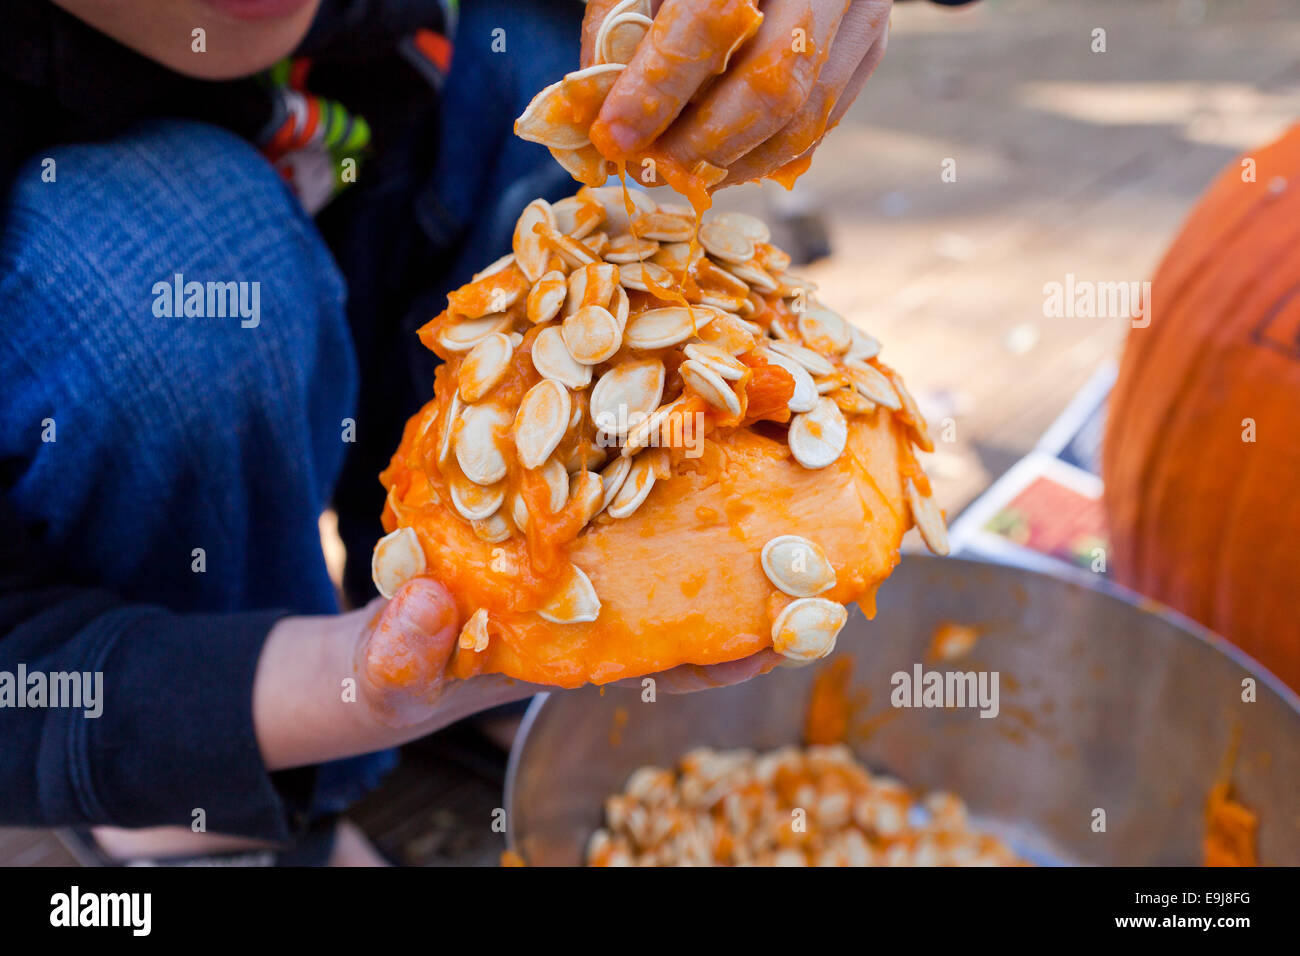 Child removing seeds from pumpkin - USA Stock Photo